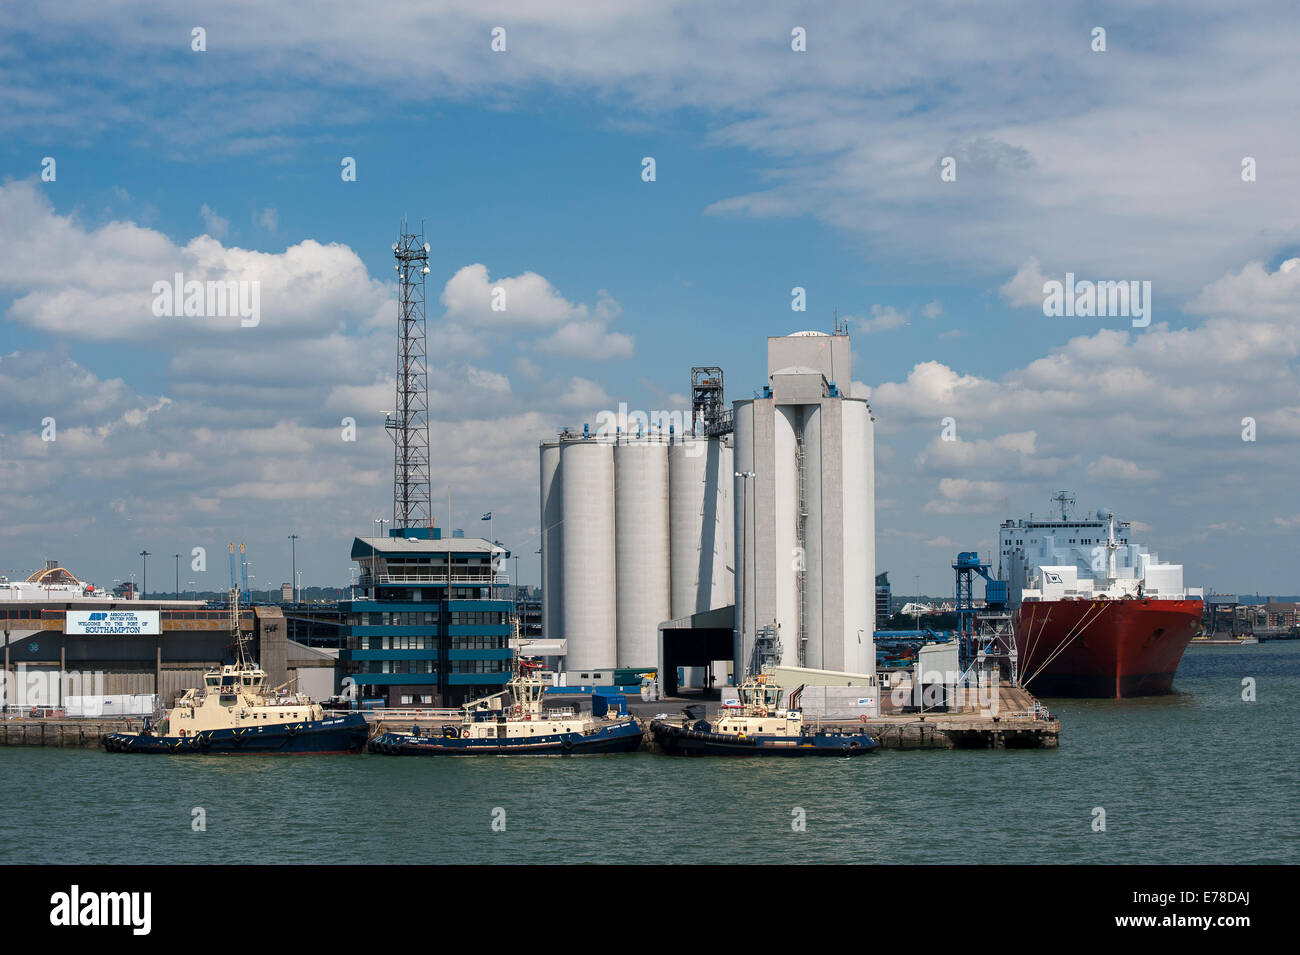 MV Tampa, roll on / roll off container ship in Southampton docks, England. Stock Photo